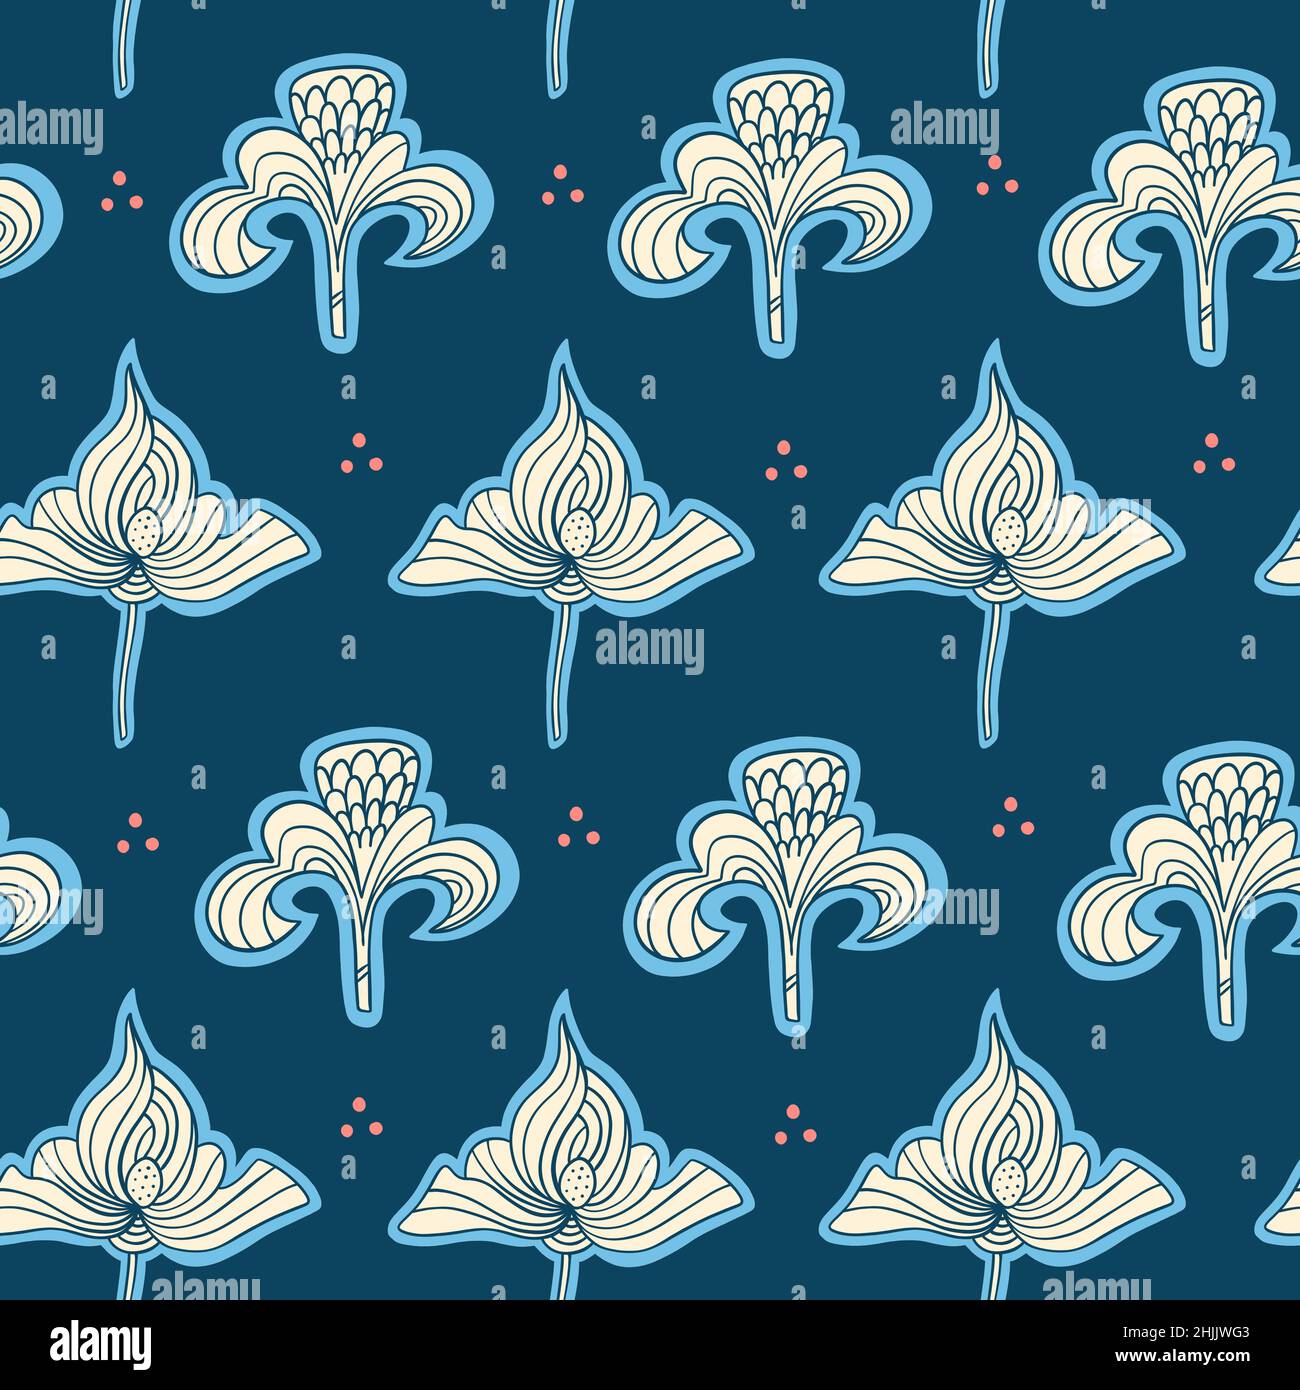 Seamless vintage floral pattern for textile, fabric, wrapping paper and more. Stock Photo